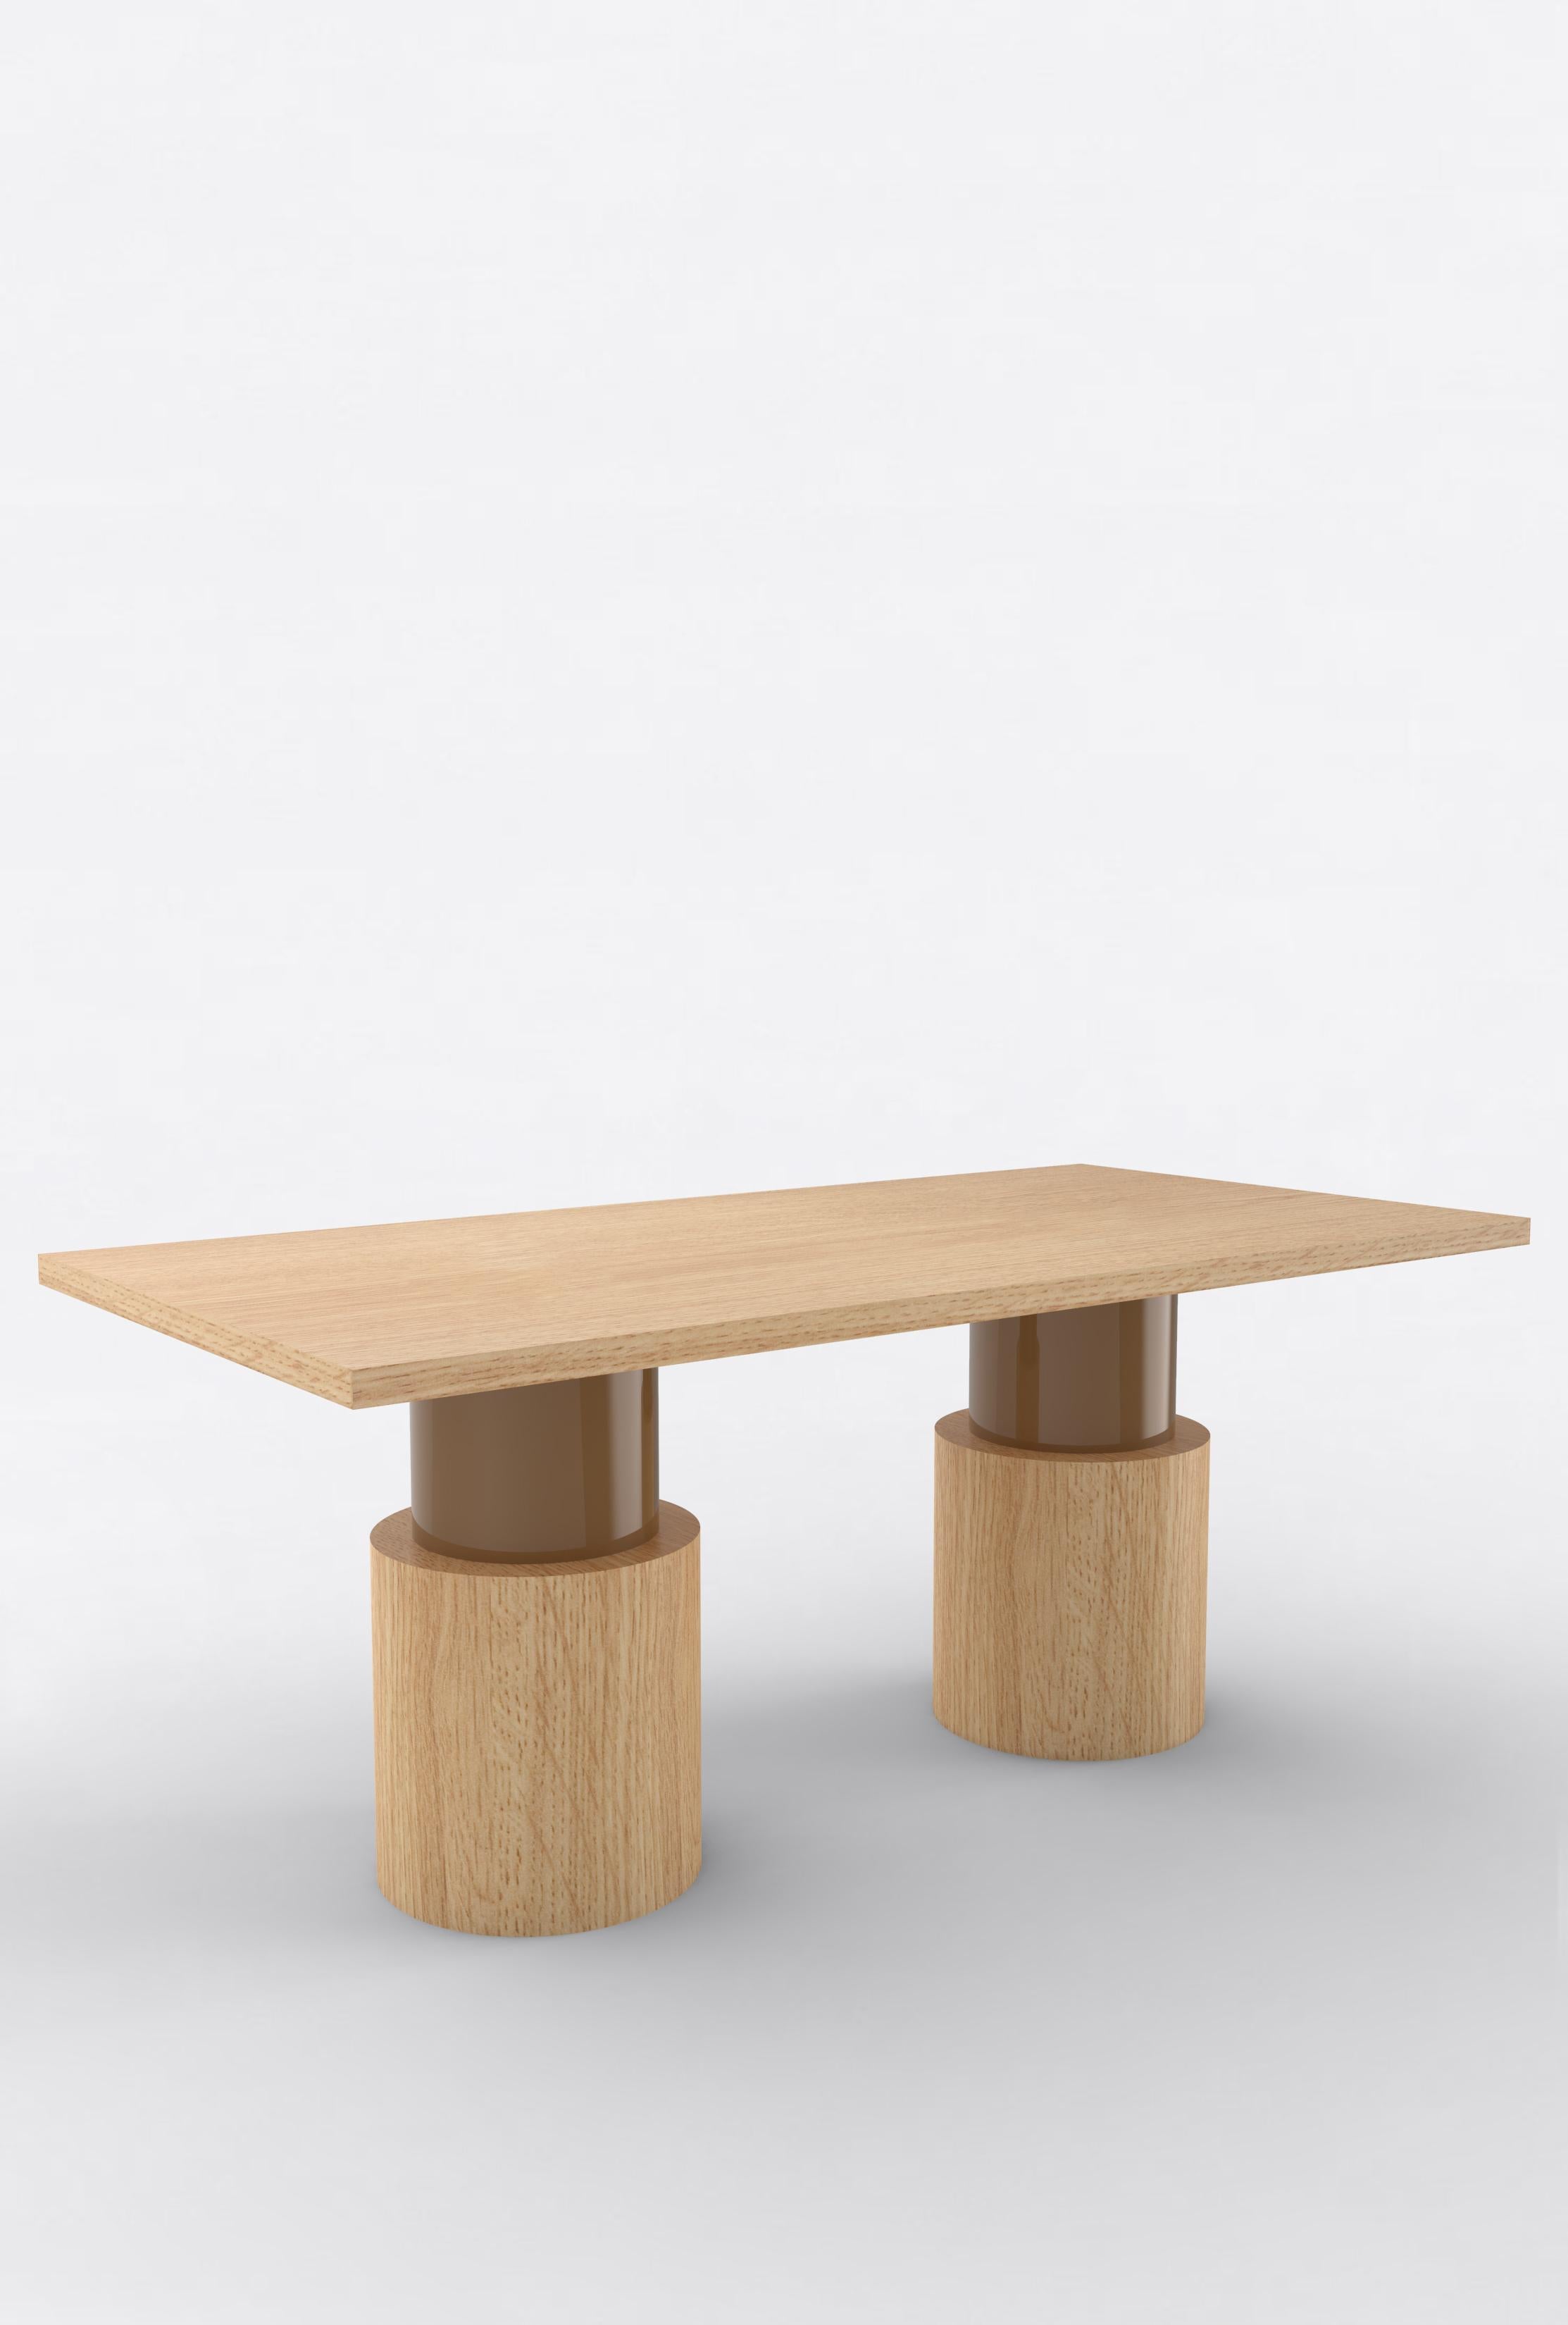 Orphan work 102C Dining Table, 2020
Shown in oak and color
Available with natural oak top with painted base.
Colors available: pink, mint, yellow, blue and brown.
Measures: 108” L x 36” W x 30” H
Dimensions available:
72” L x 36” W x 30” H
84” L x